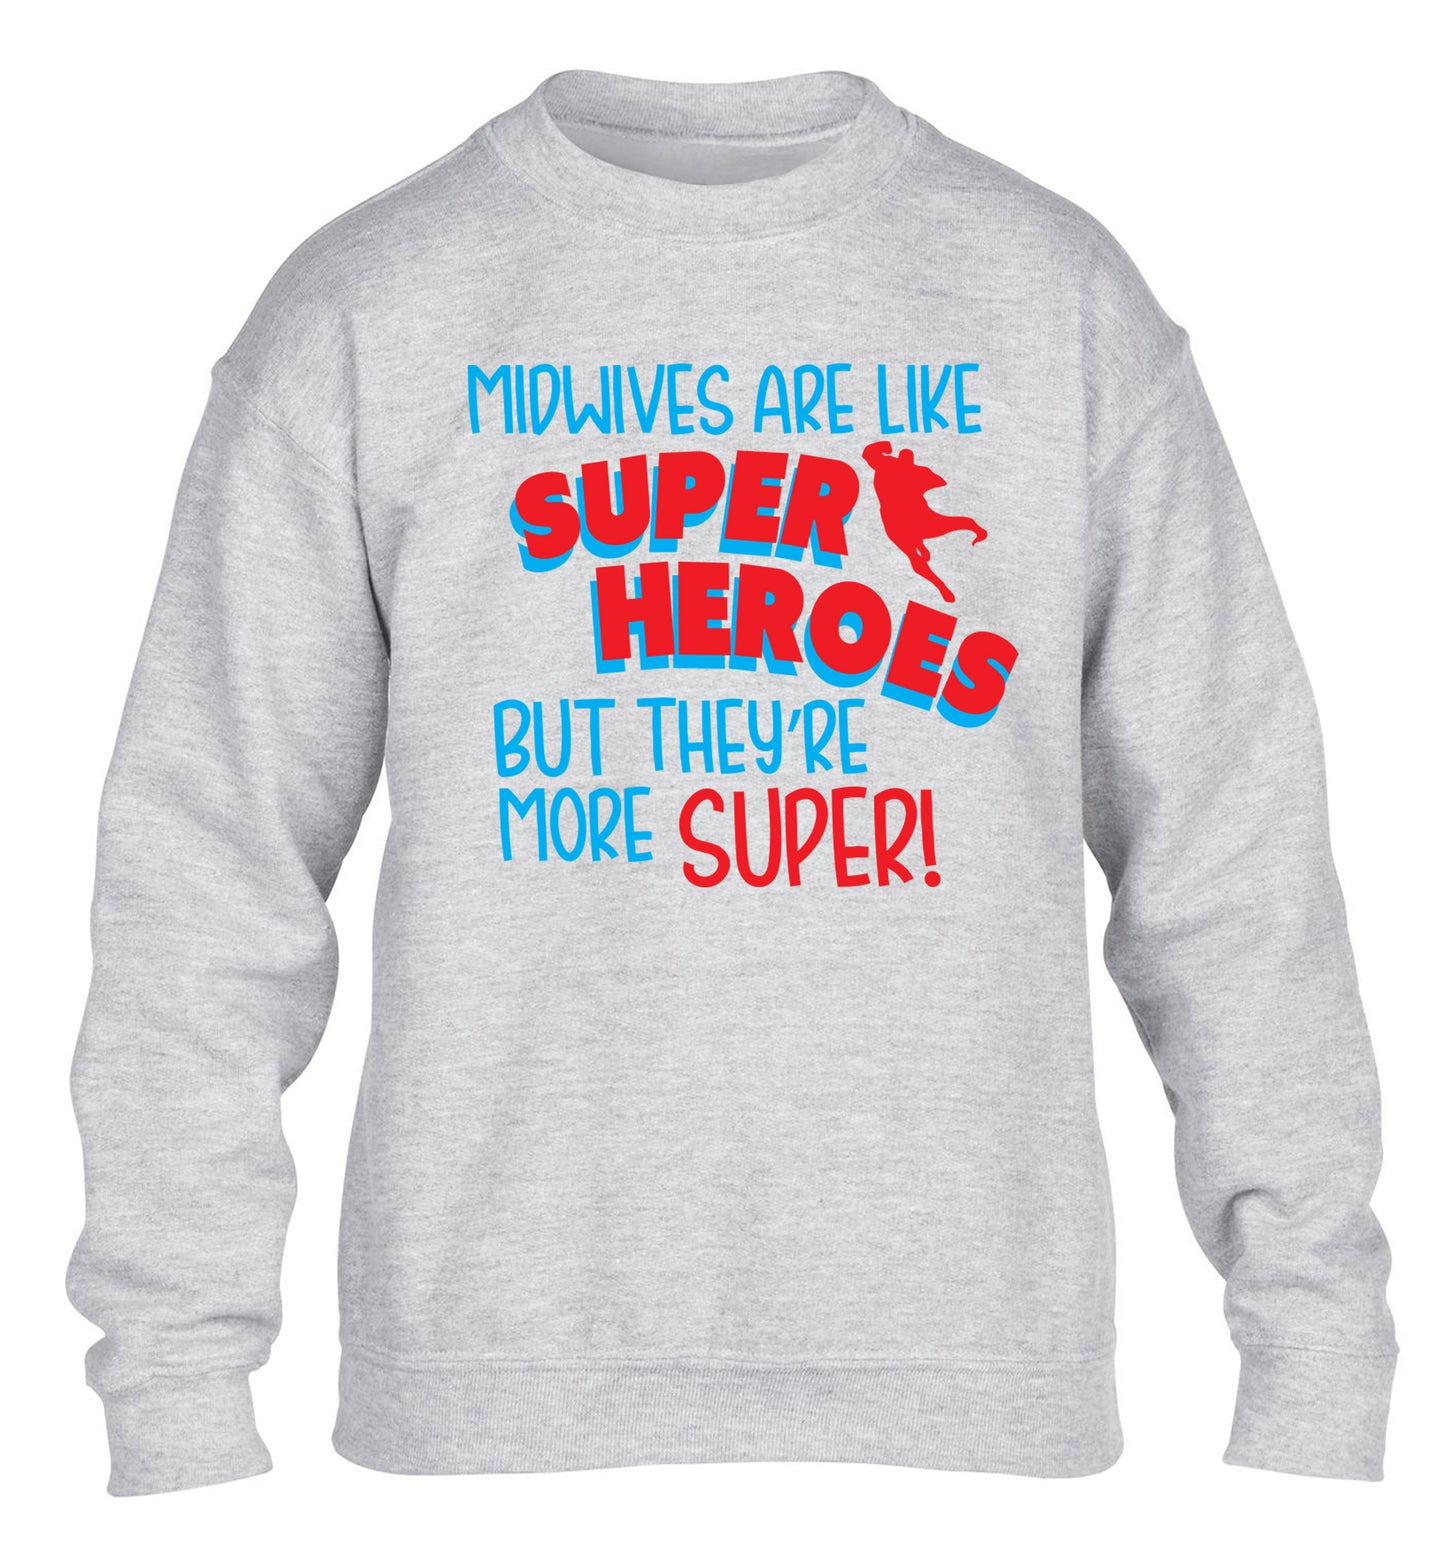 Midwives are like superheros but they're more super children's grey sweater 12-13 Years